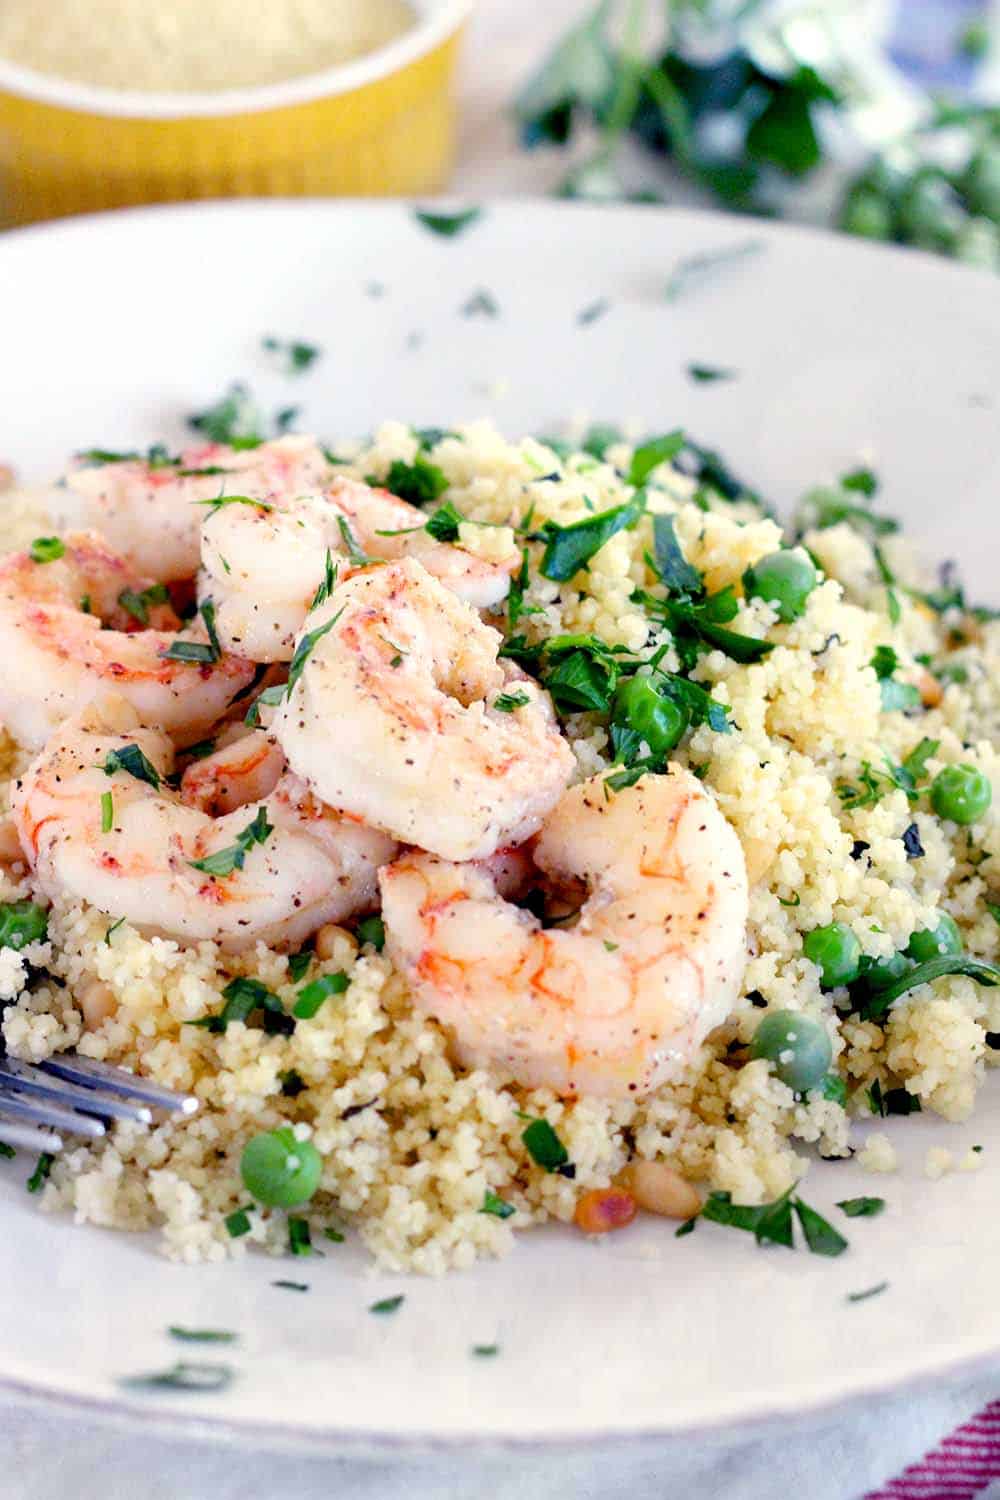 This Shrimp and Couscous with Peas and Mint recipe is a simple, healthy, 20 minute meal that's a cinch to make and perfect for spring!